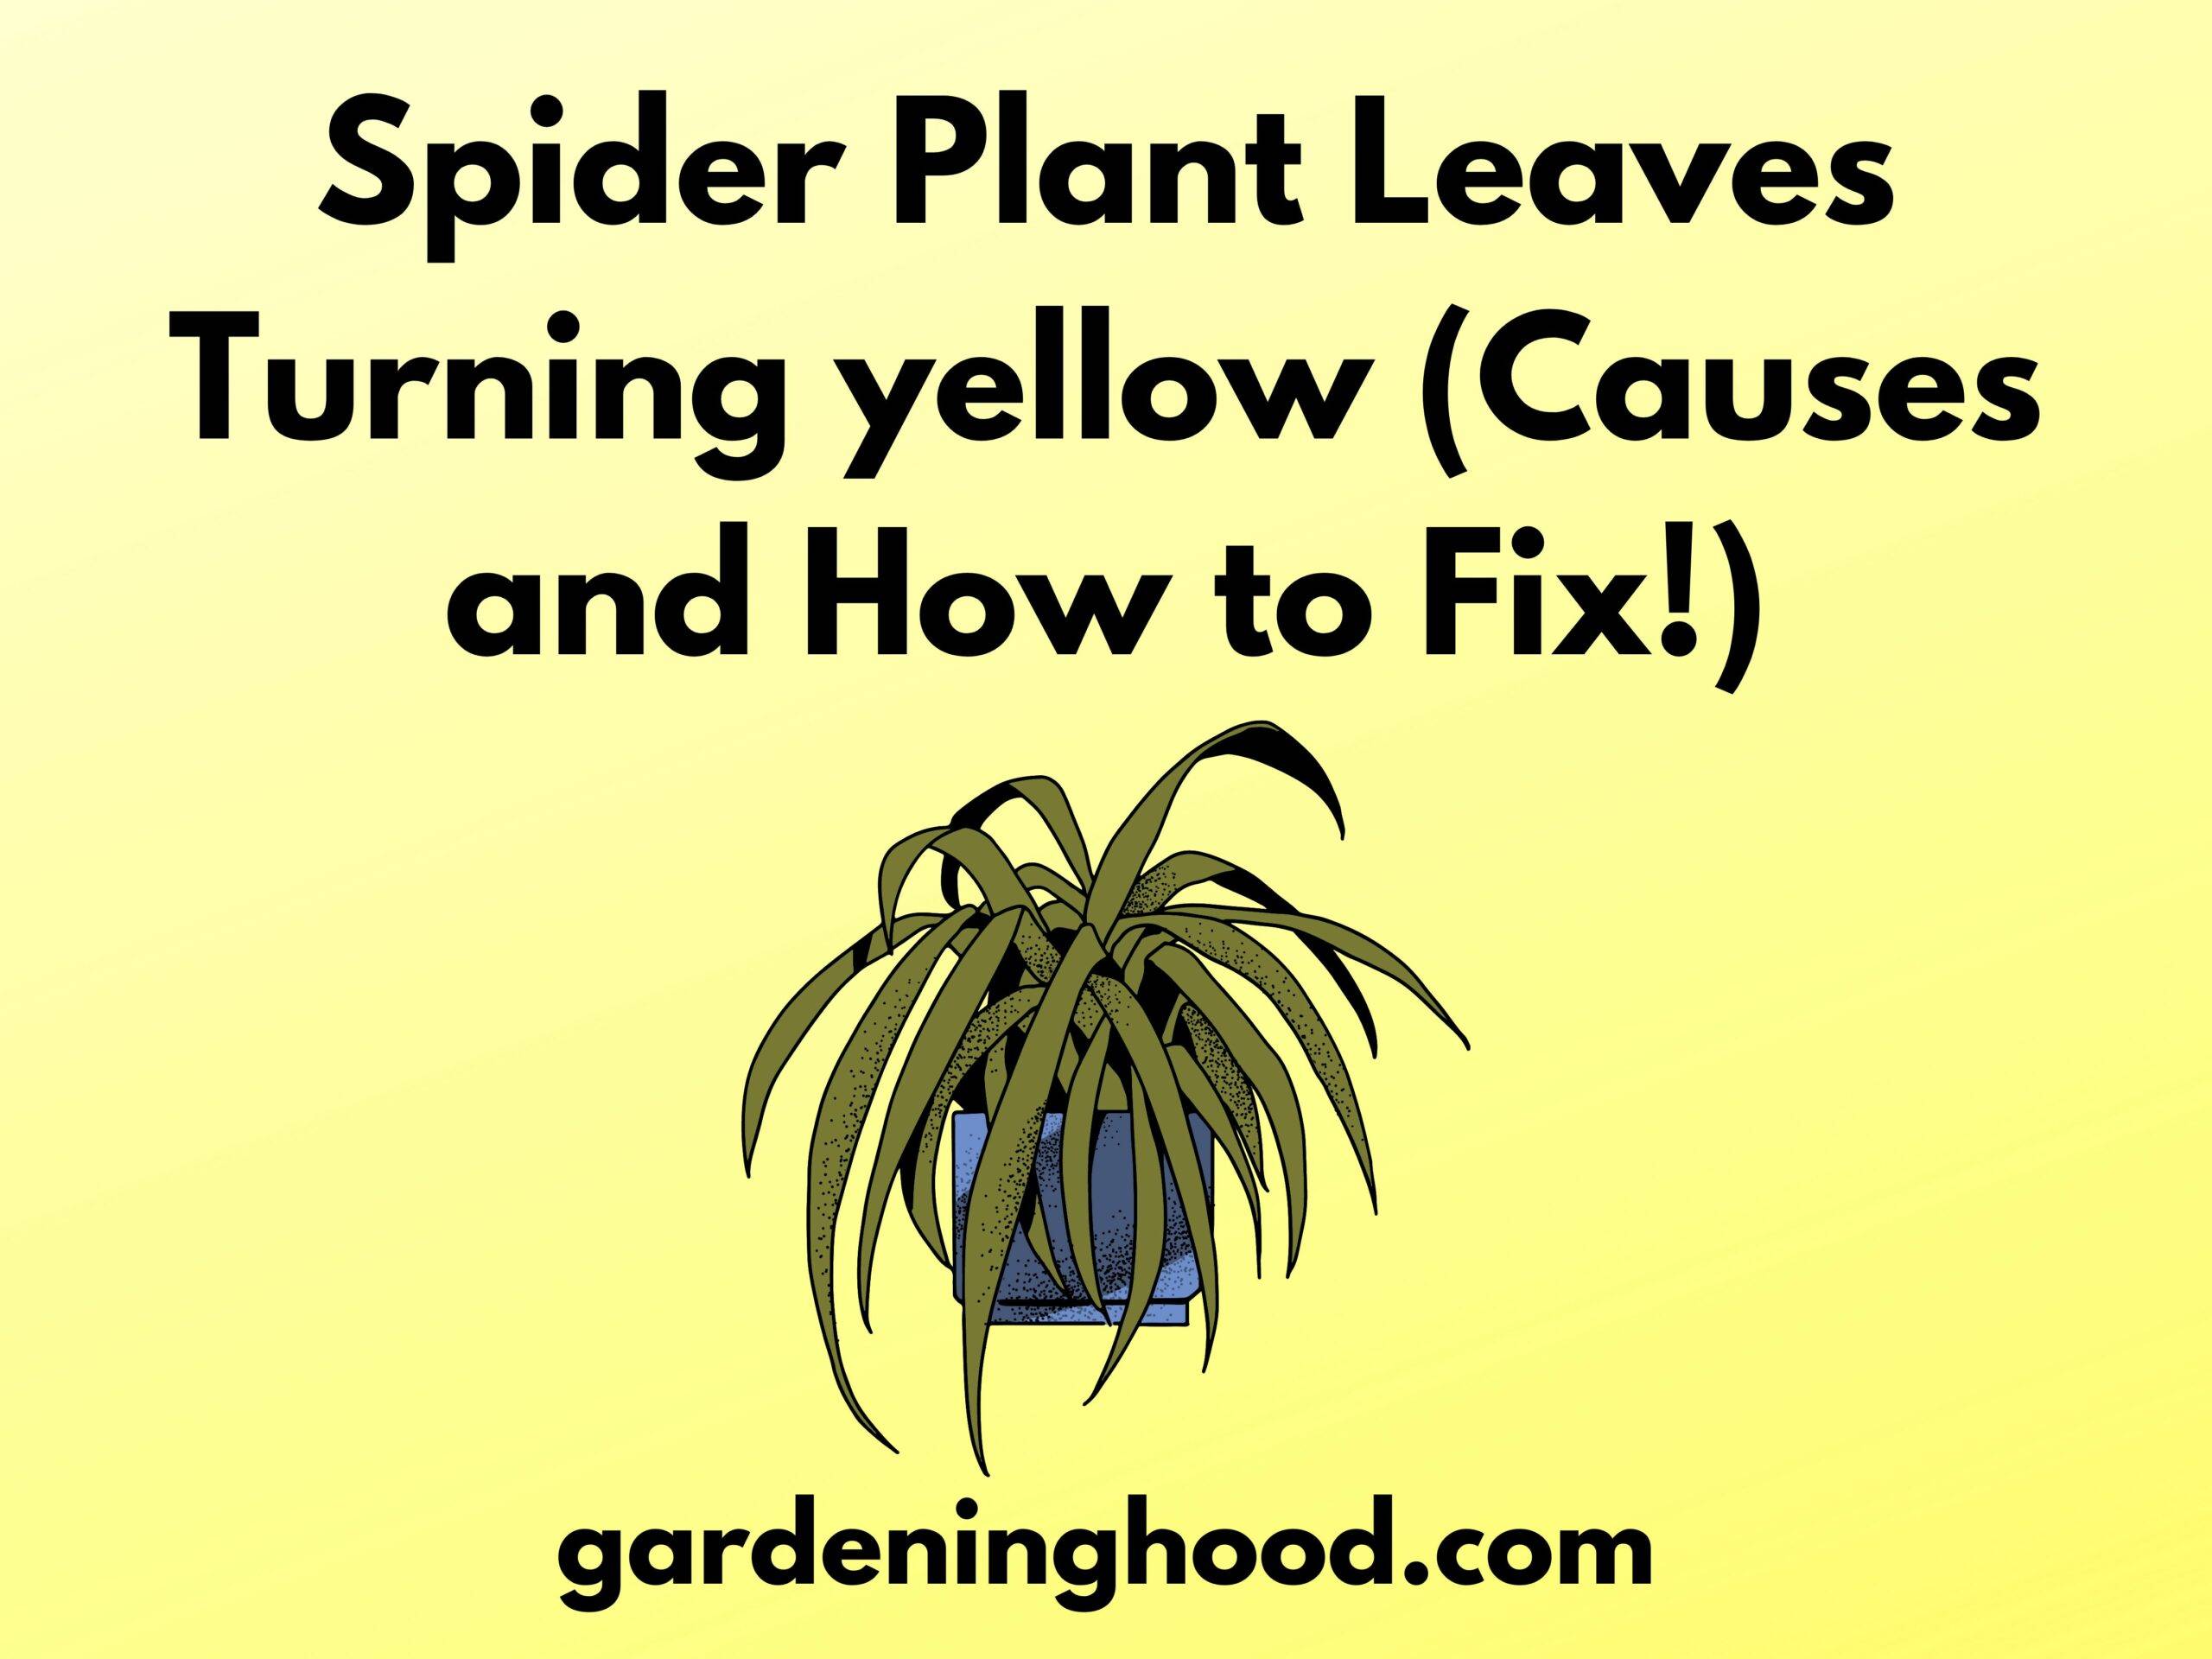 Spider Plant Leaves Turning yellow (Causes and How to Fix!)